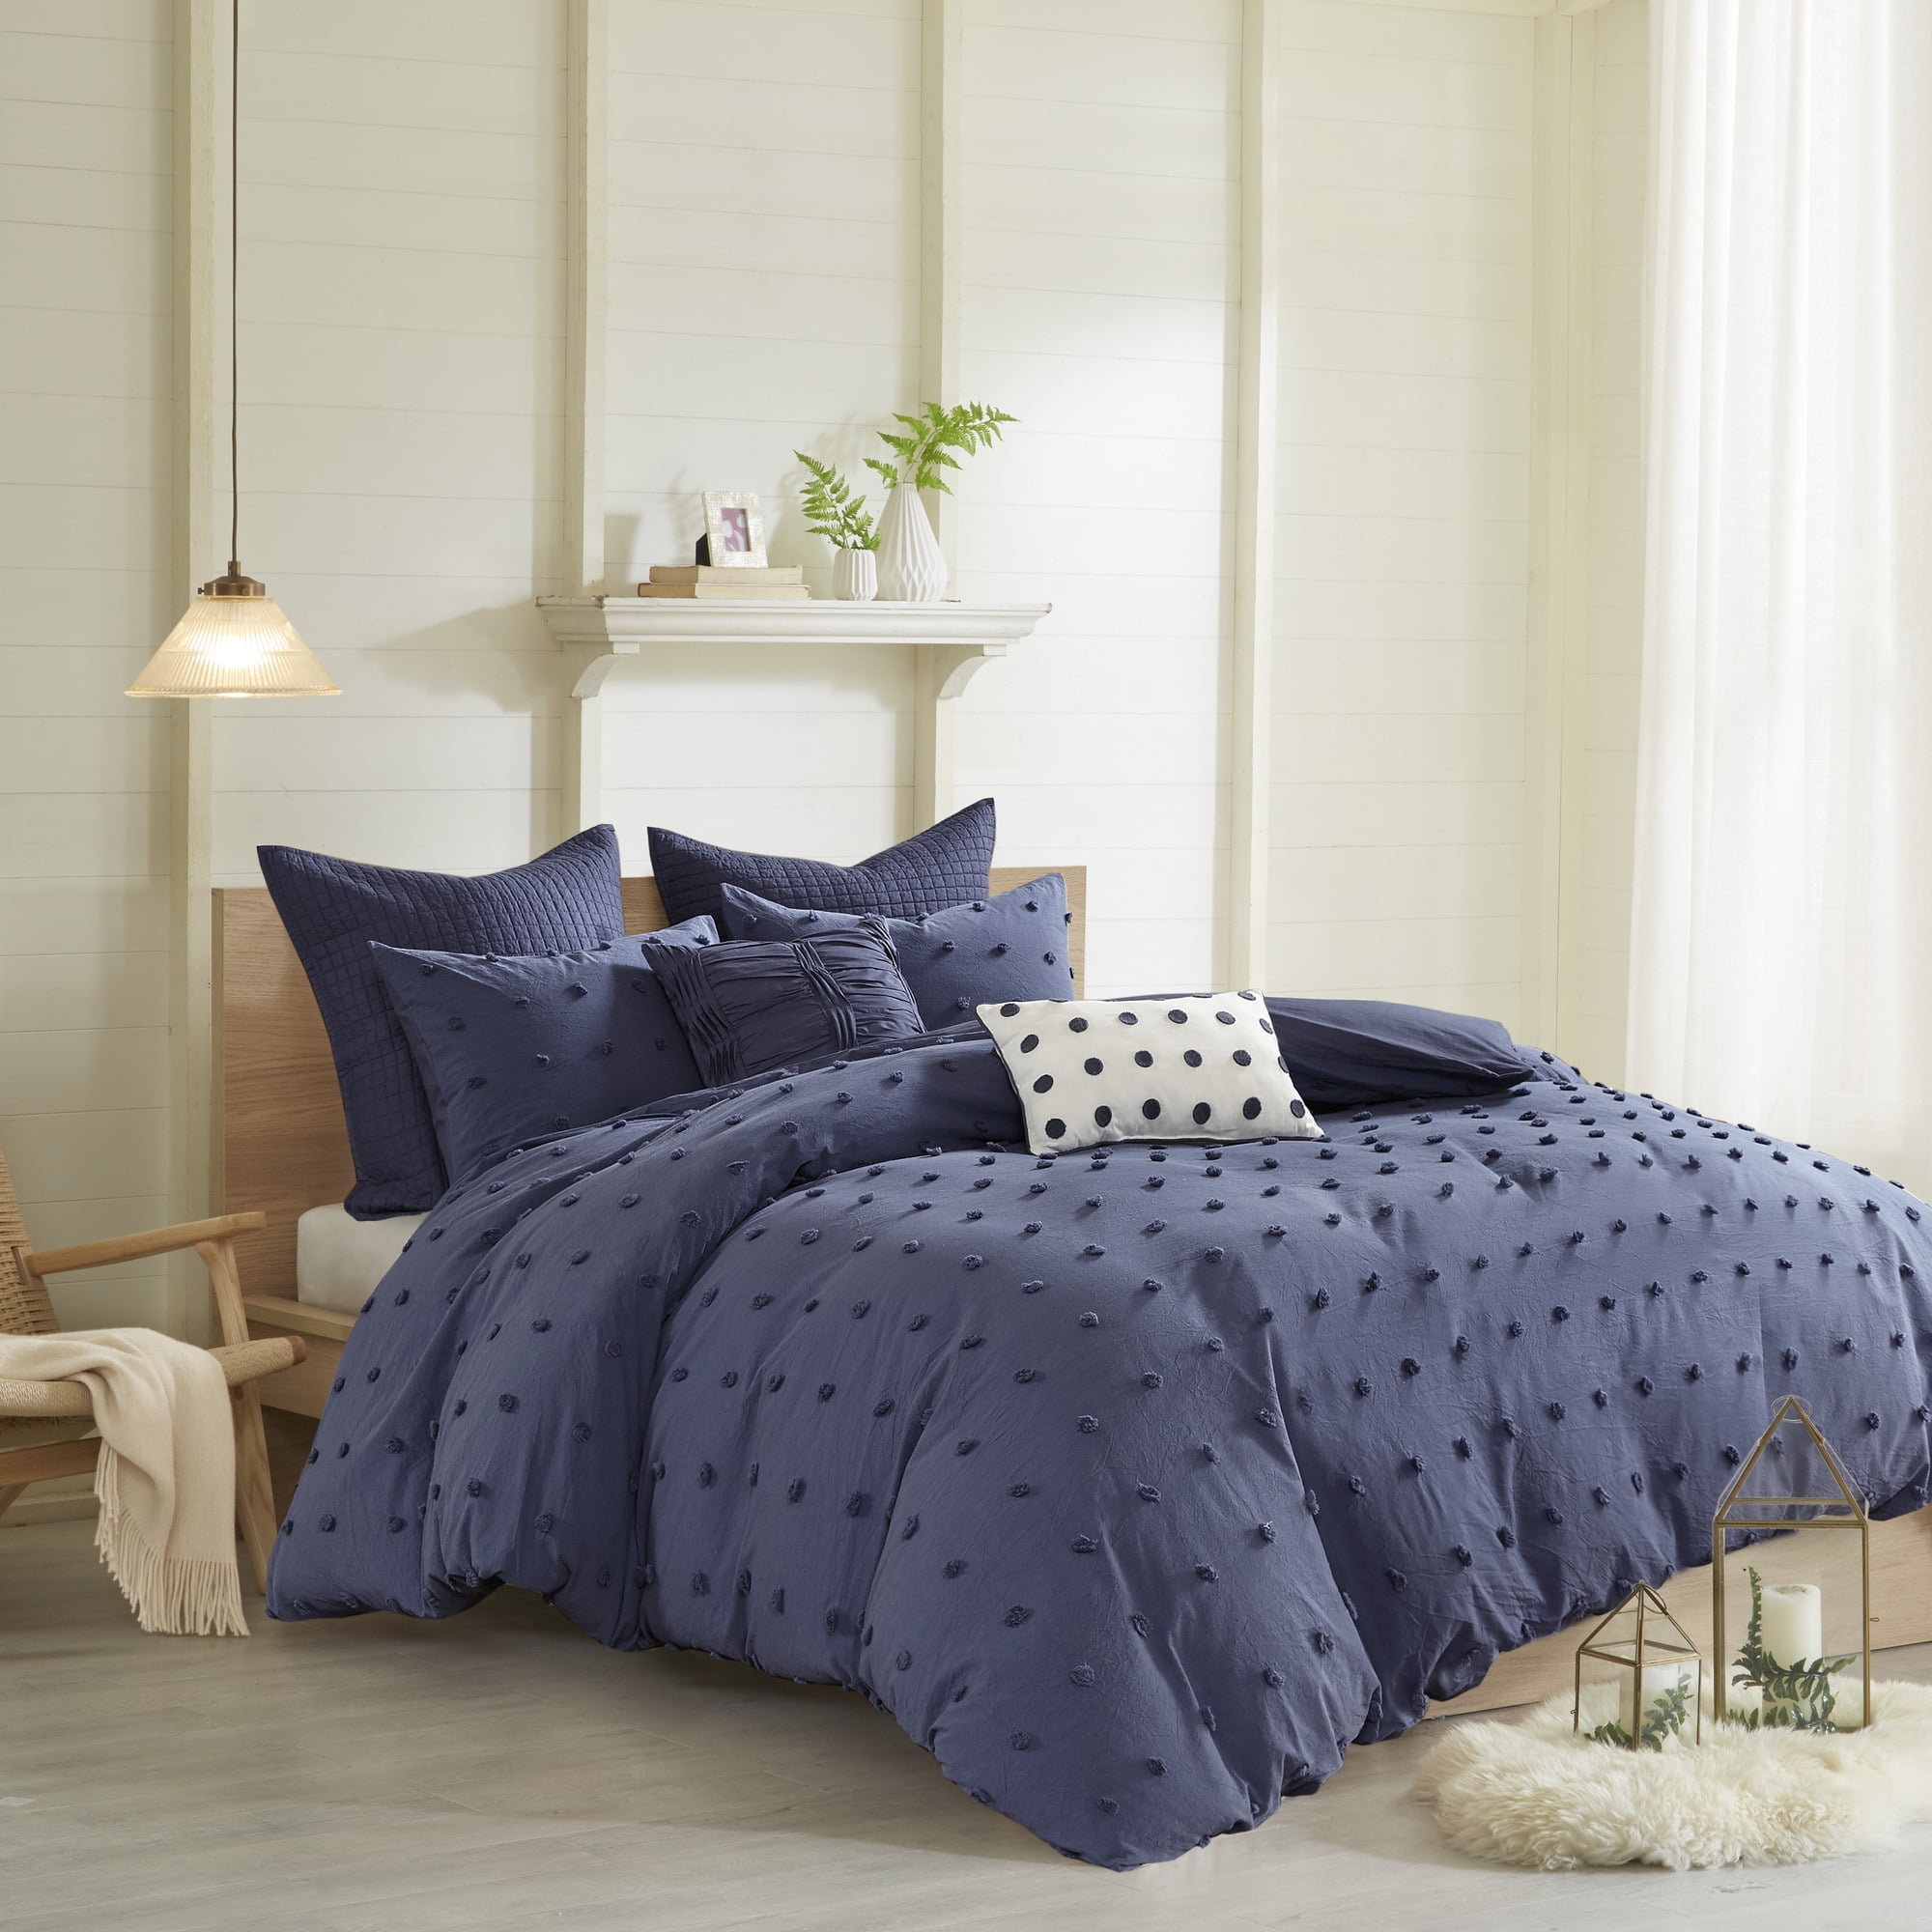 queen size bedspreads clearance closeout